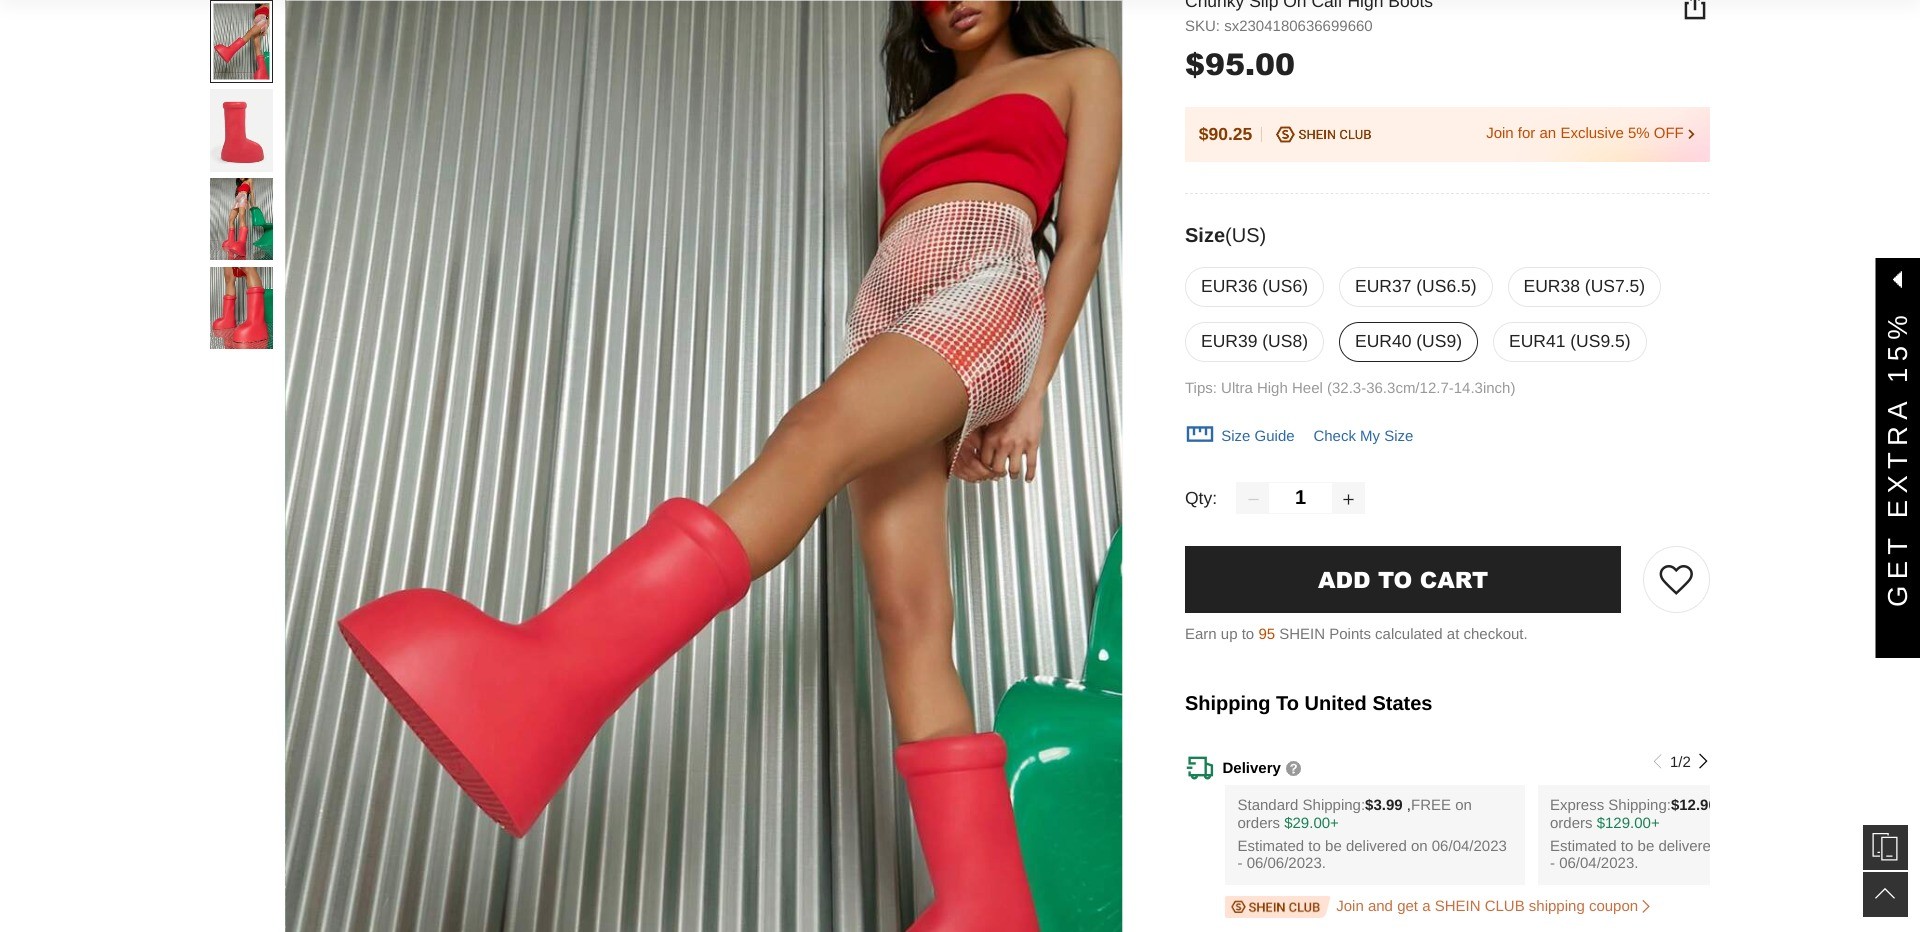 Screenshot of us.shein.com offering chunky slip-on boots sold for $95